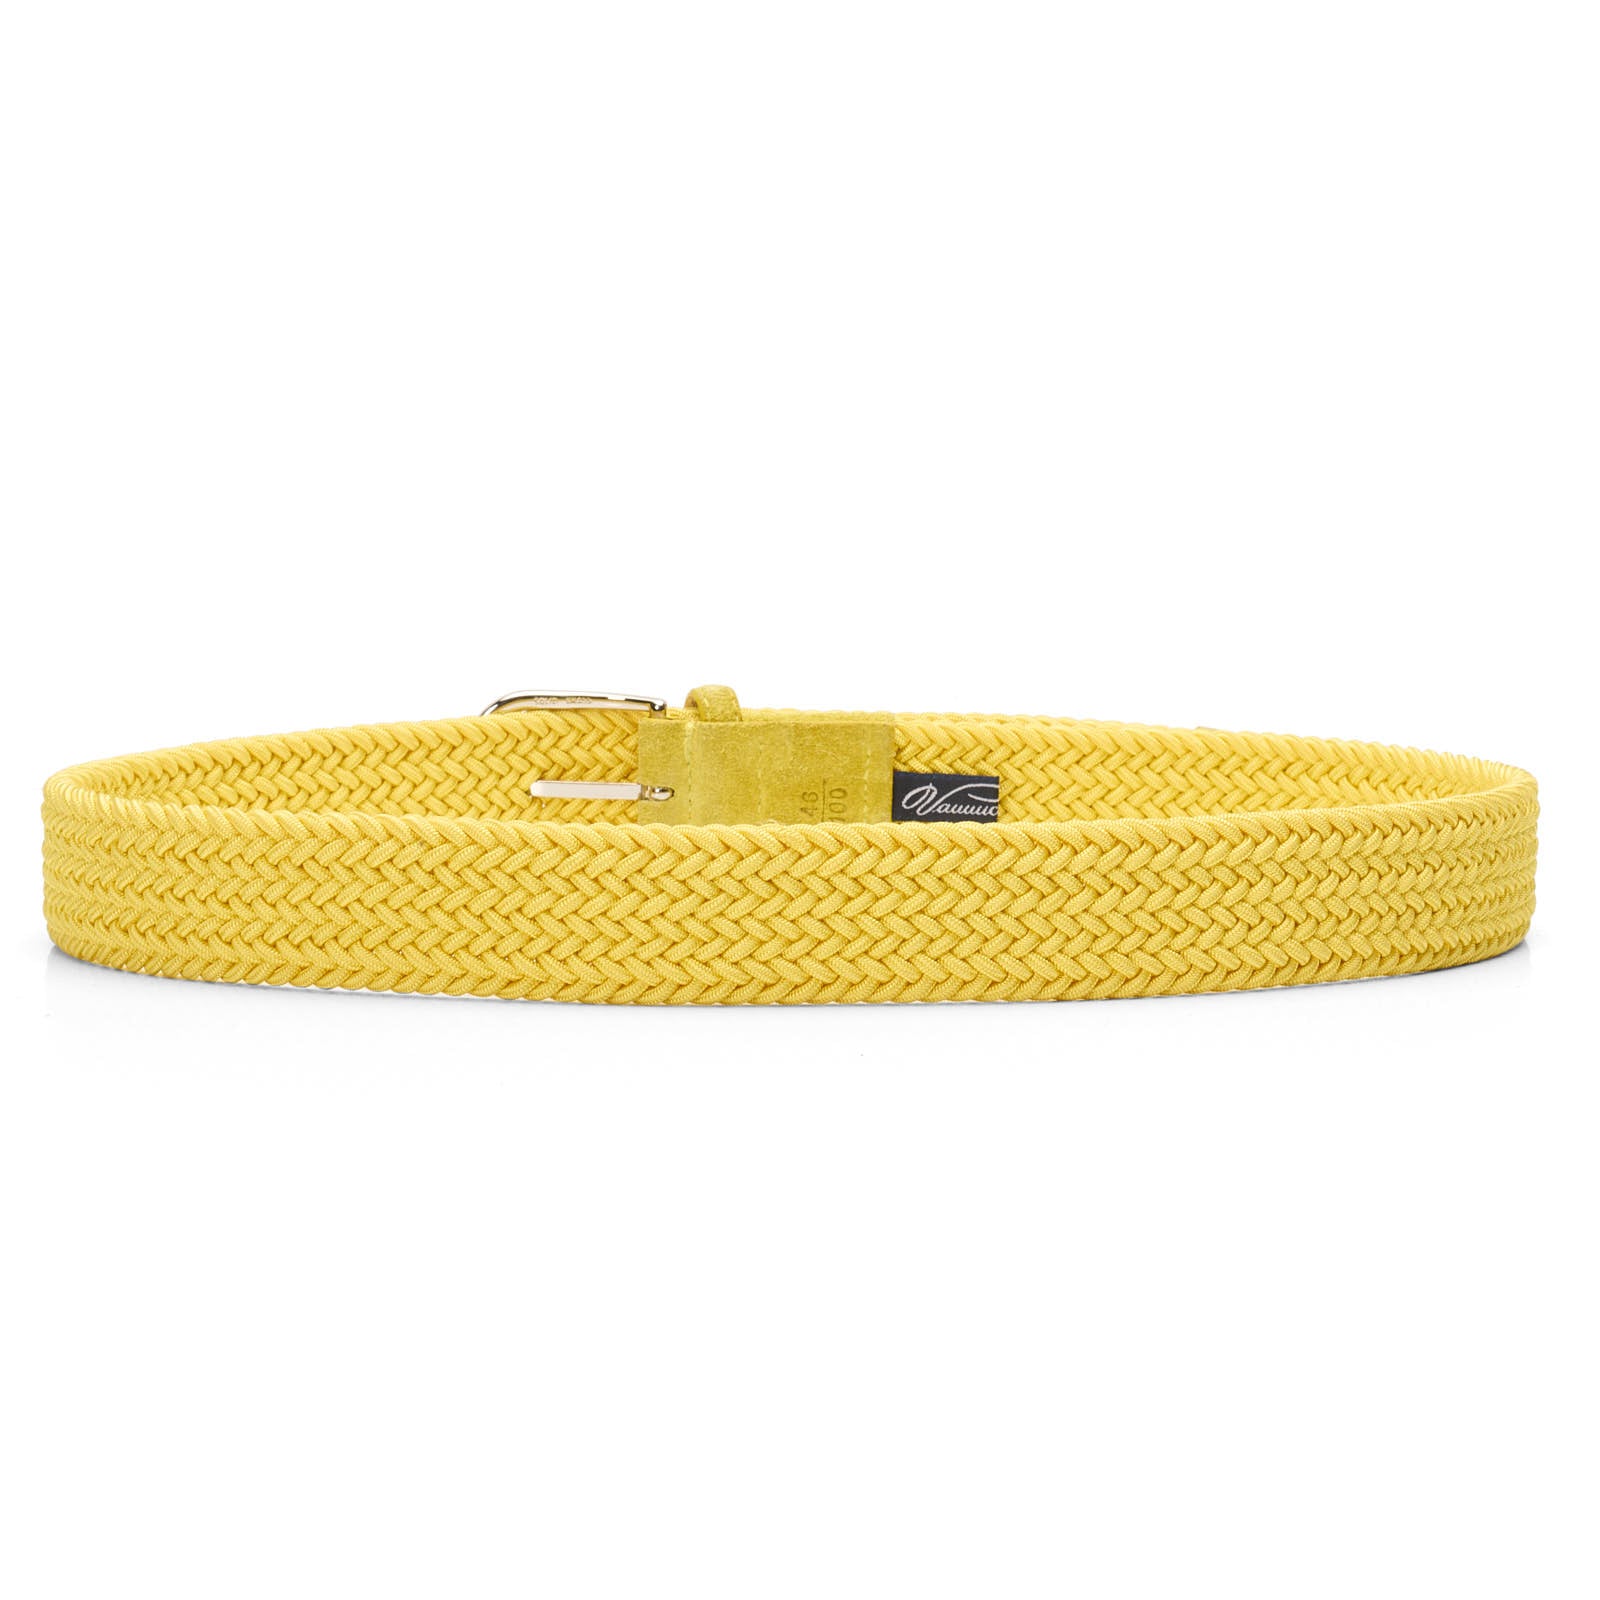 PAOLO VITALE for VANNUCCI Milano Yellow Stretch Woven Braided Belt 100cm NEW 46"